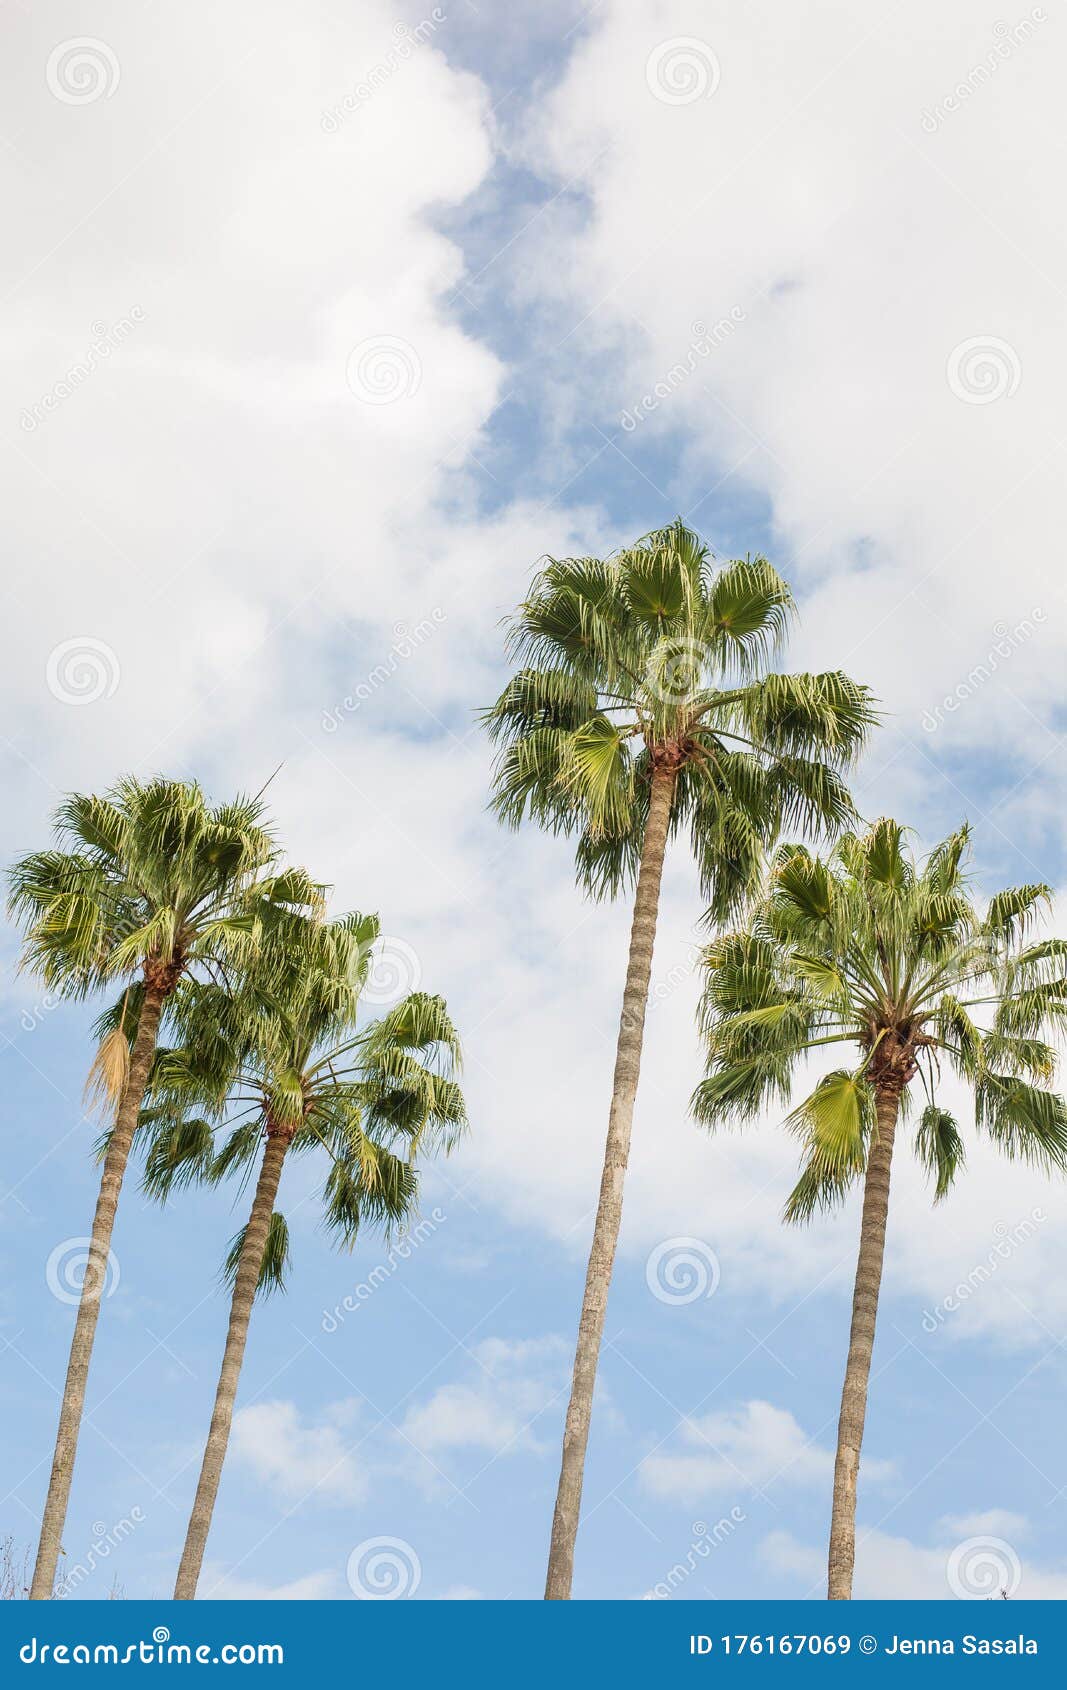 palm trees with blue sky in sunny orlando florida